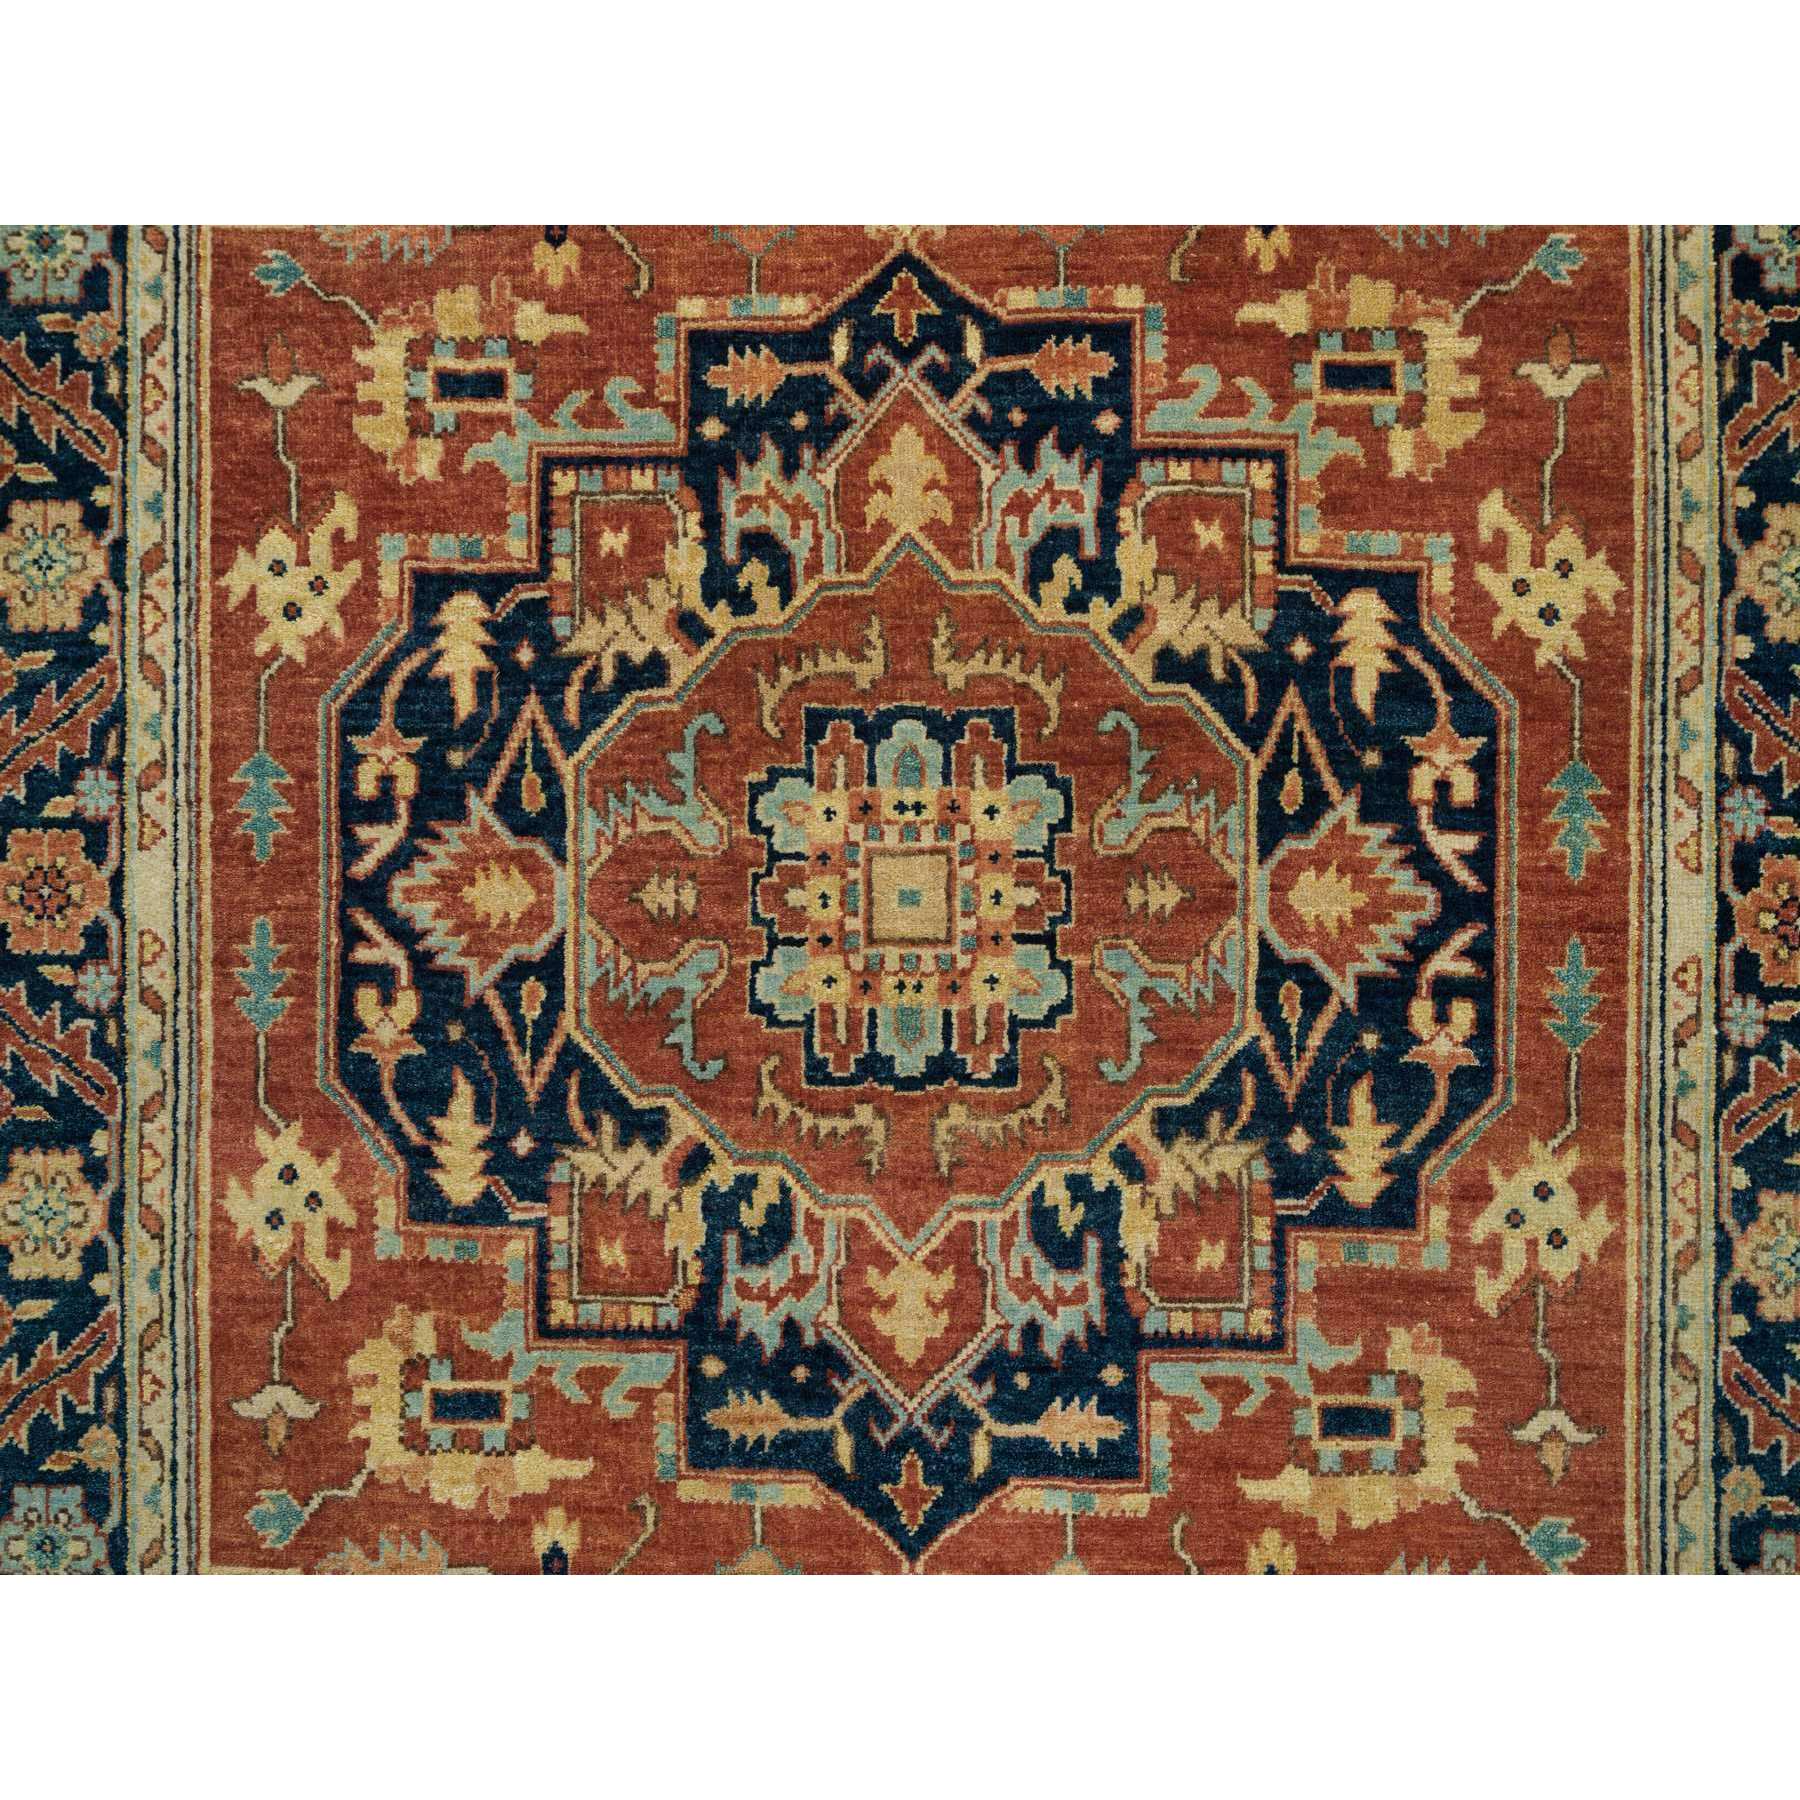 4'x6'2" Terracotta Red, Antiqued Fine Heriz Re-Creation, Natural Dyes, Densely Woven, 100% Wool, Hand Woven, Oriental Rug 